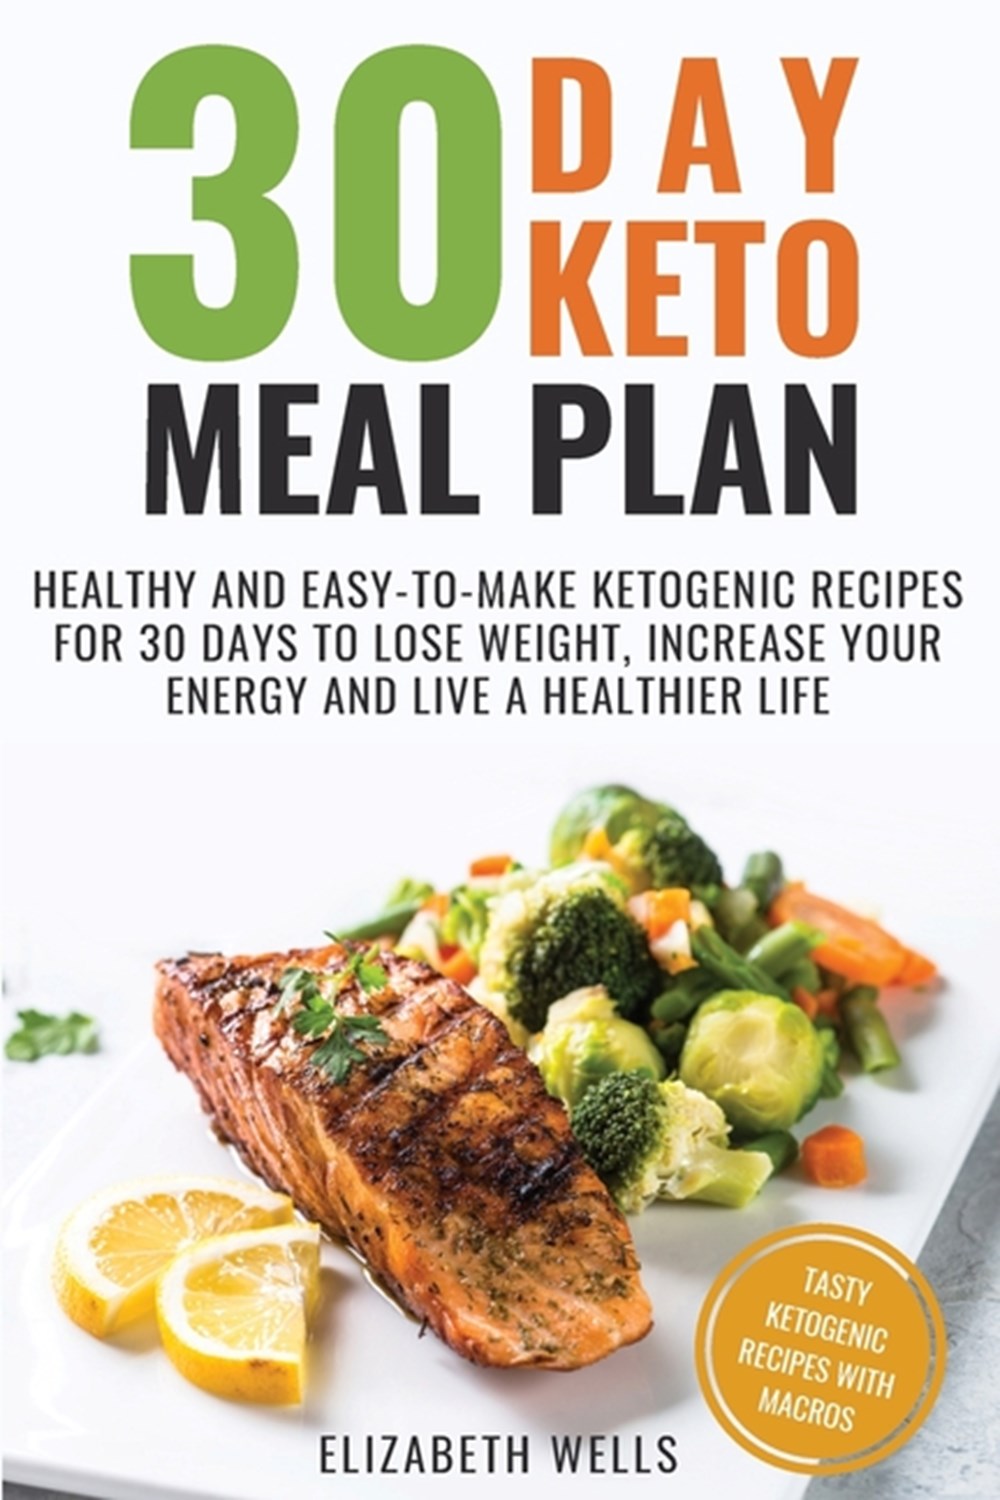 buy-30-day-keto-meal-plan-healthy-and-easy-to-make-ketogenic-recipes